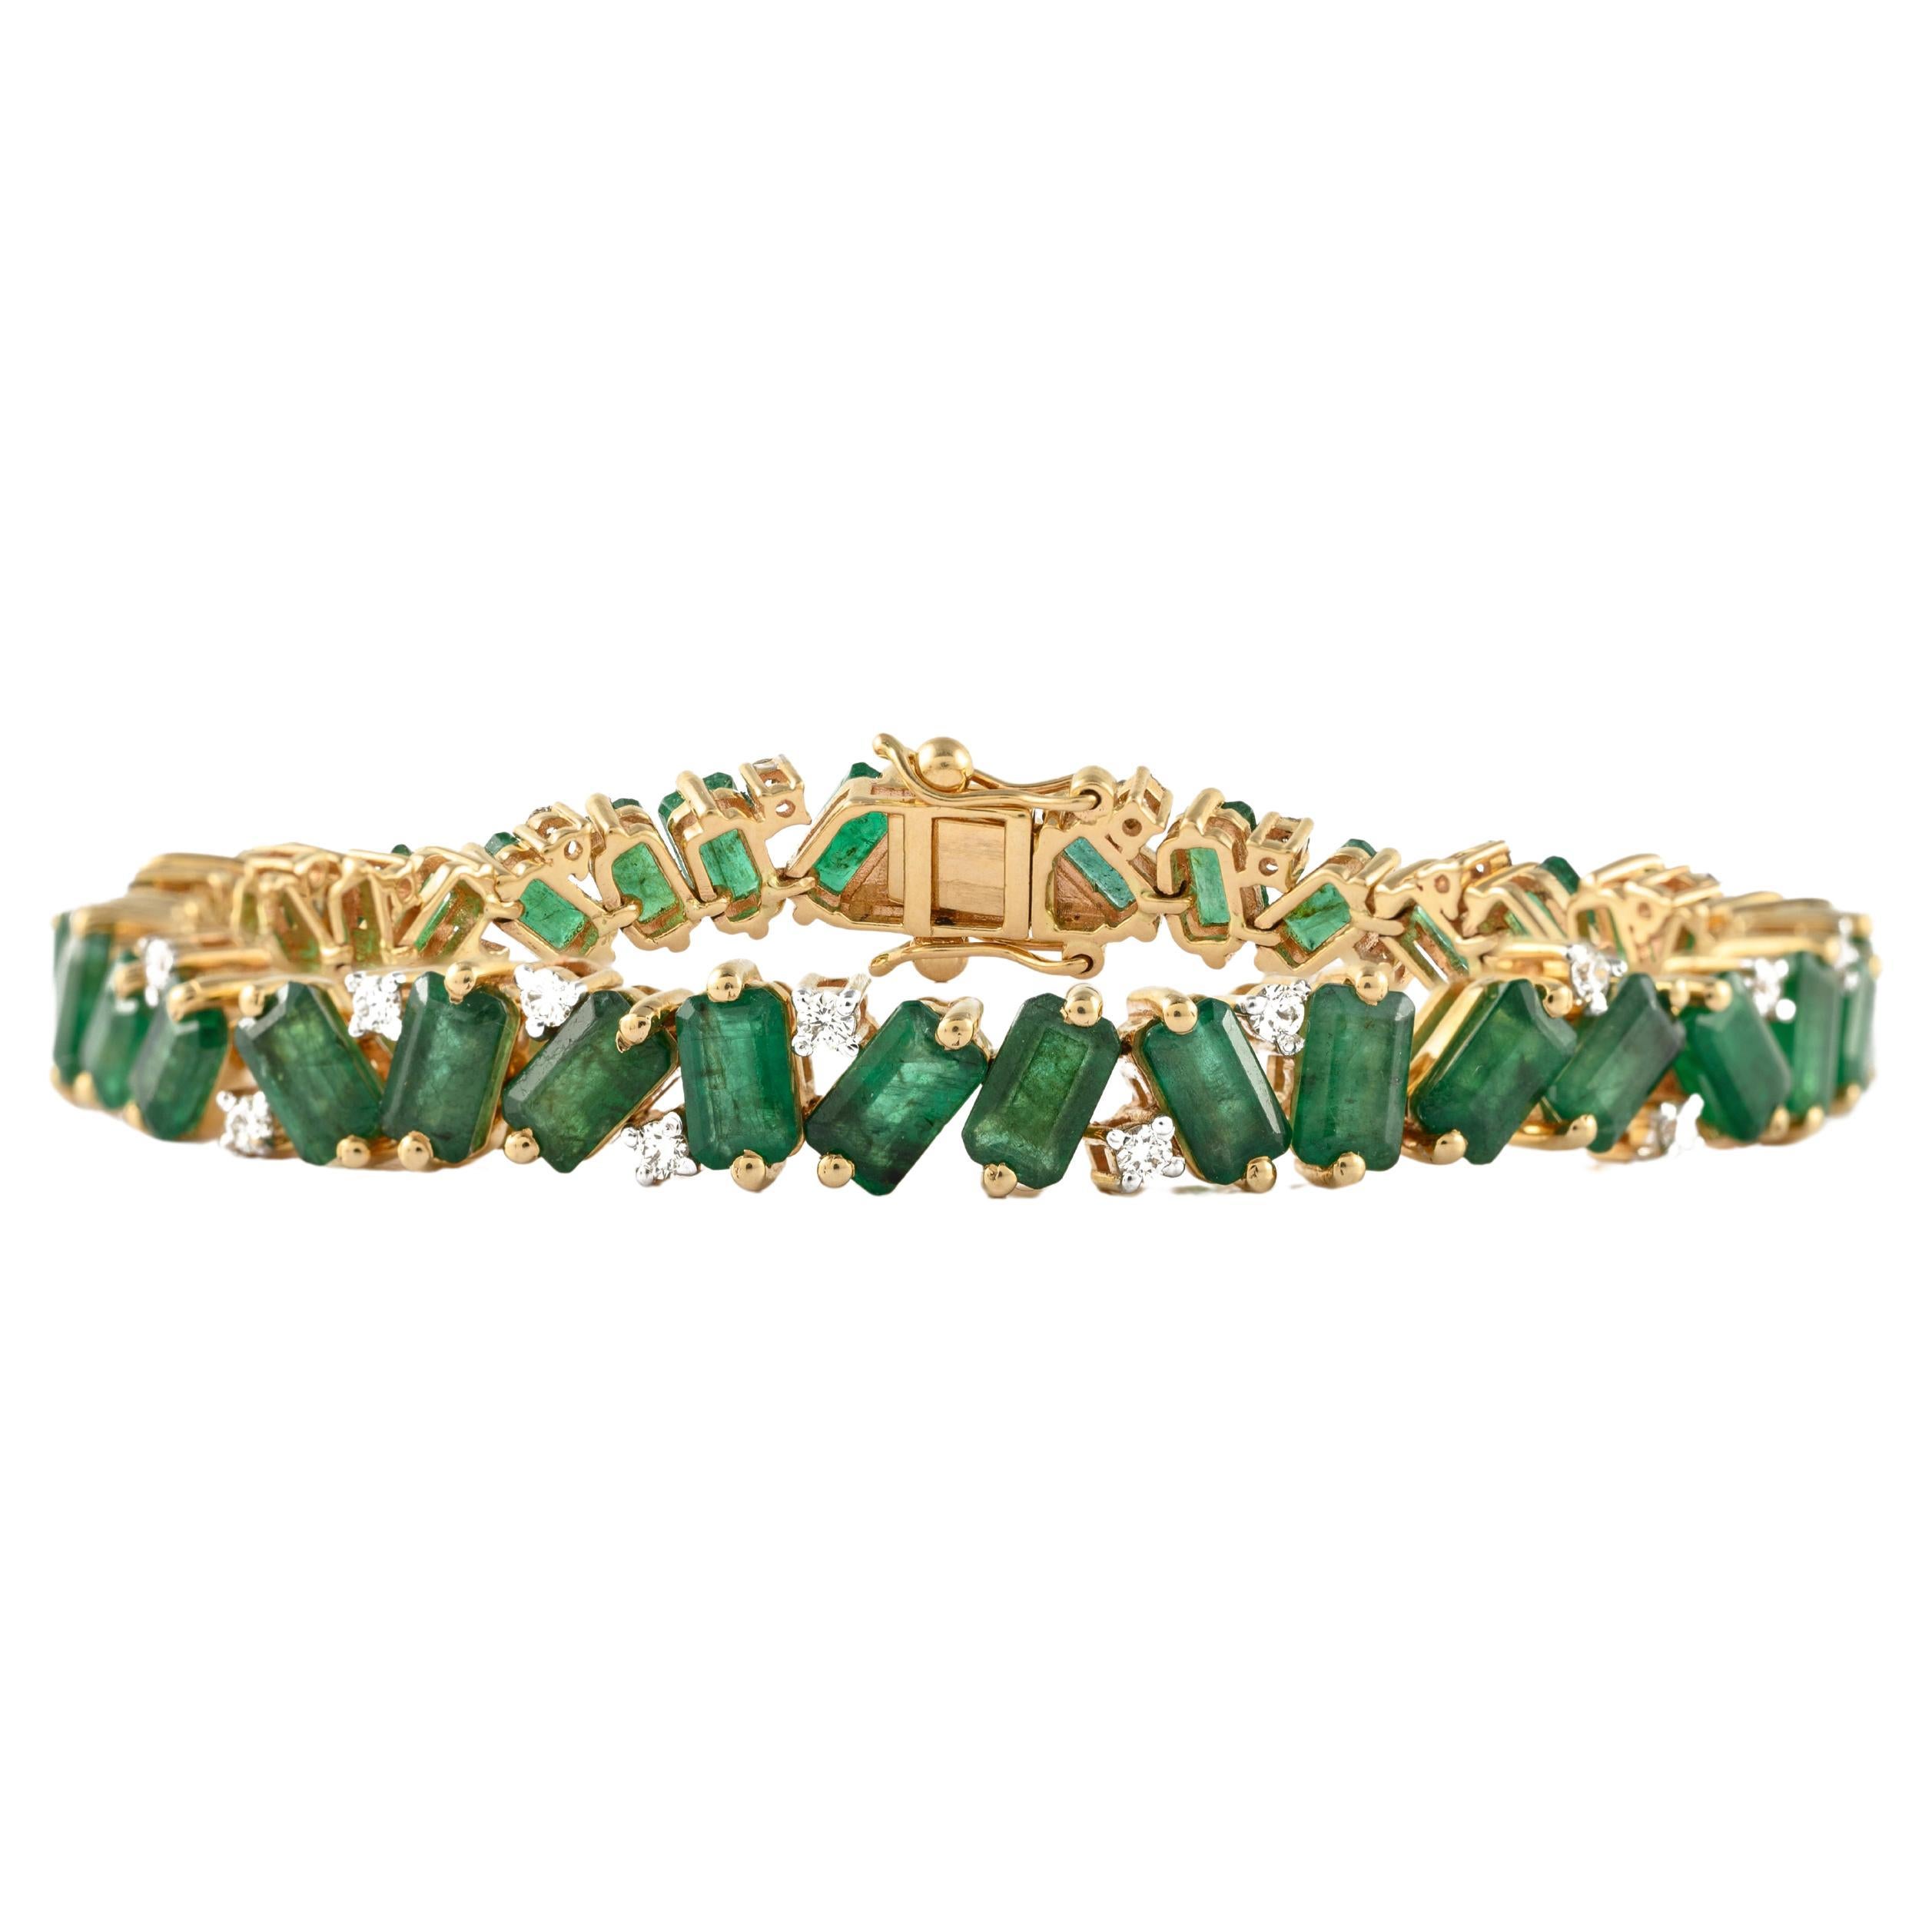 10.68 ct Brilliant Diamond and Emerald Tennis Bracelet in 14K Solid Yellow Gold For Sale